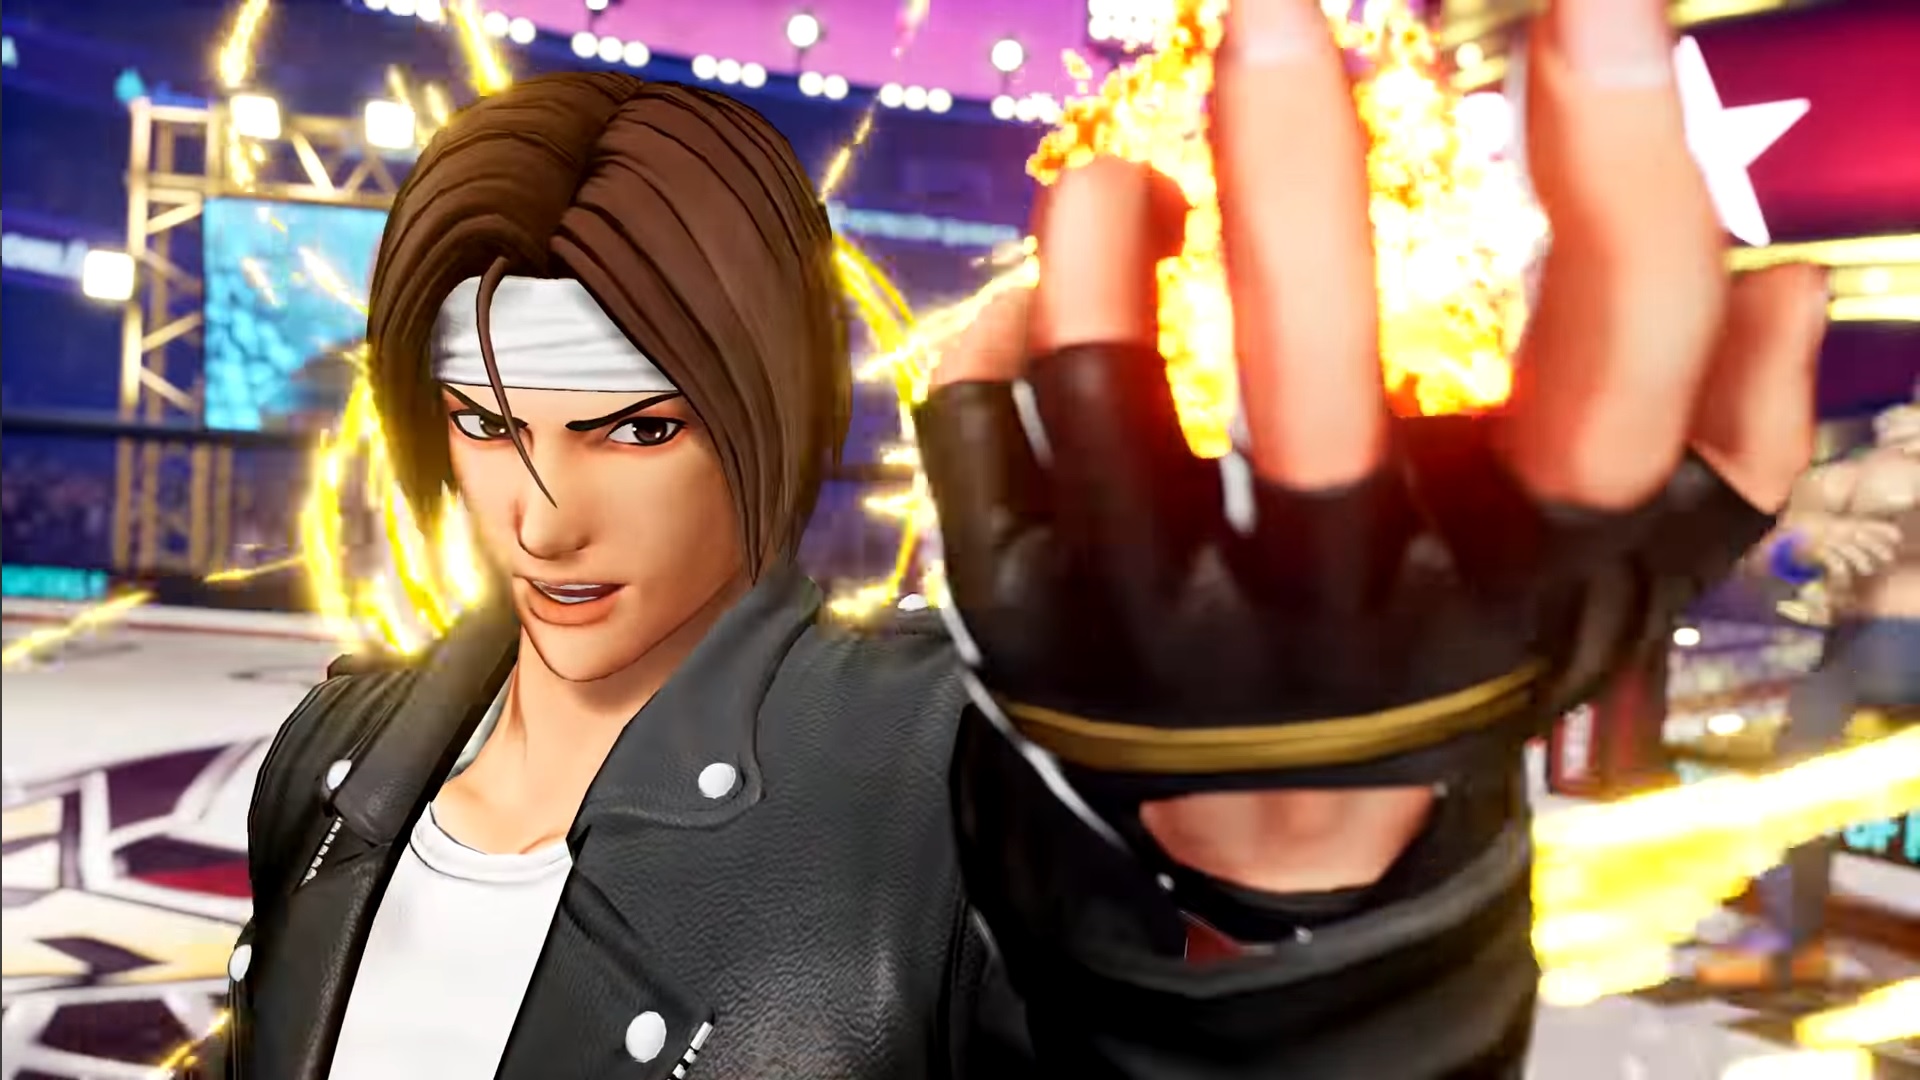 king the king of fighters xv